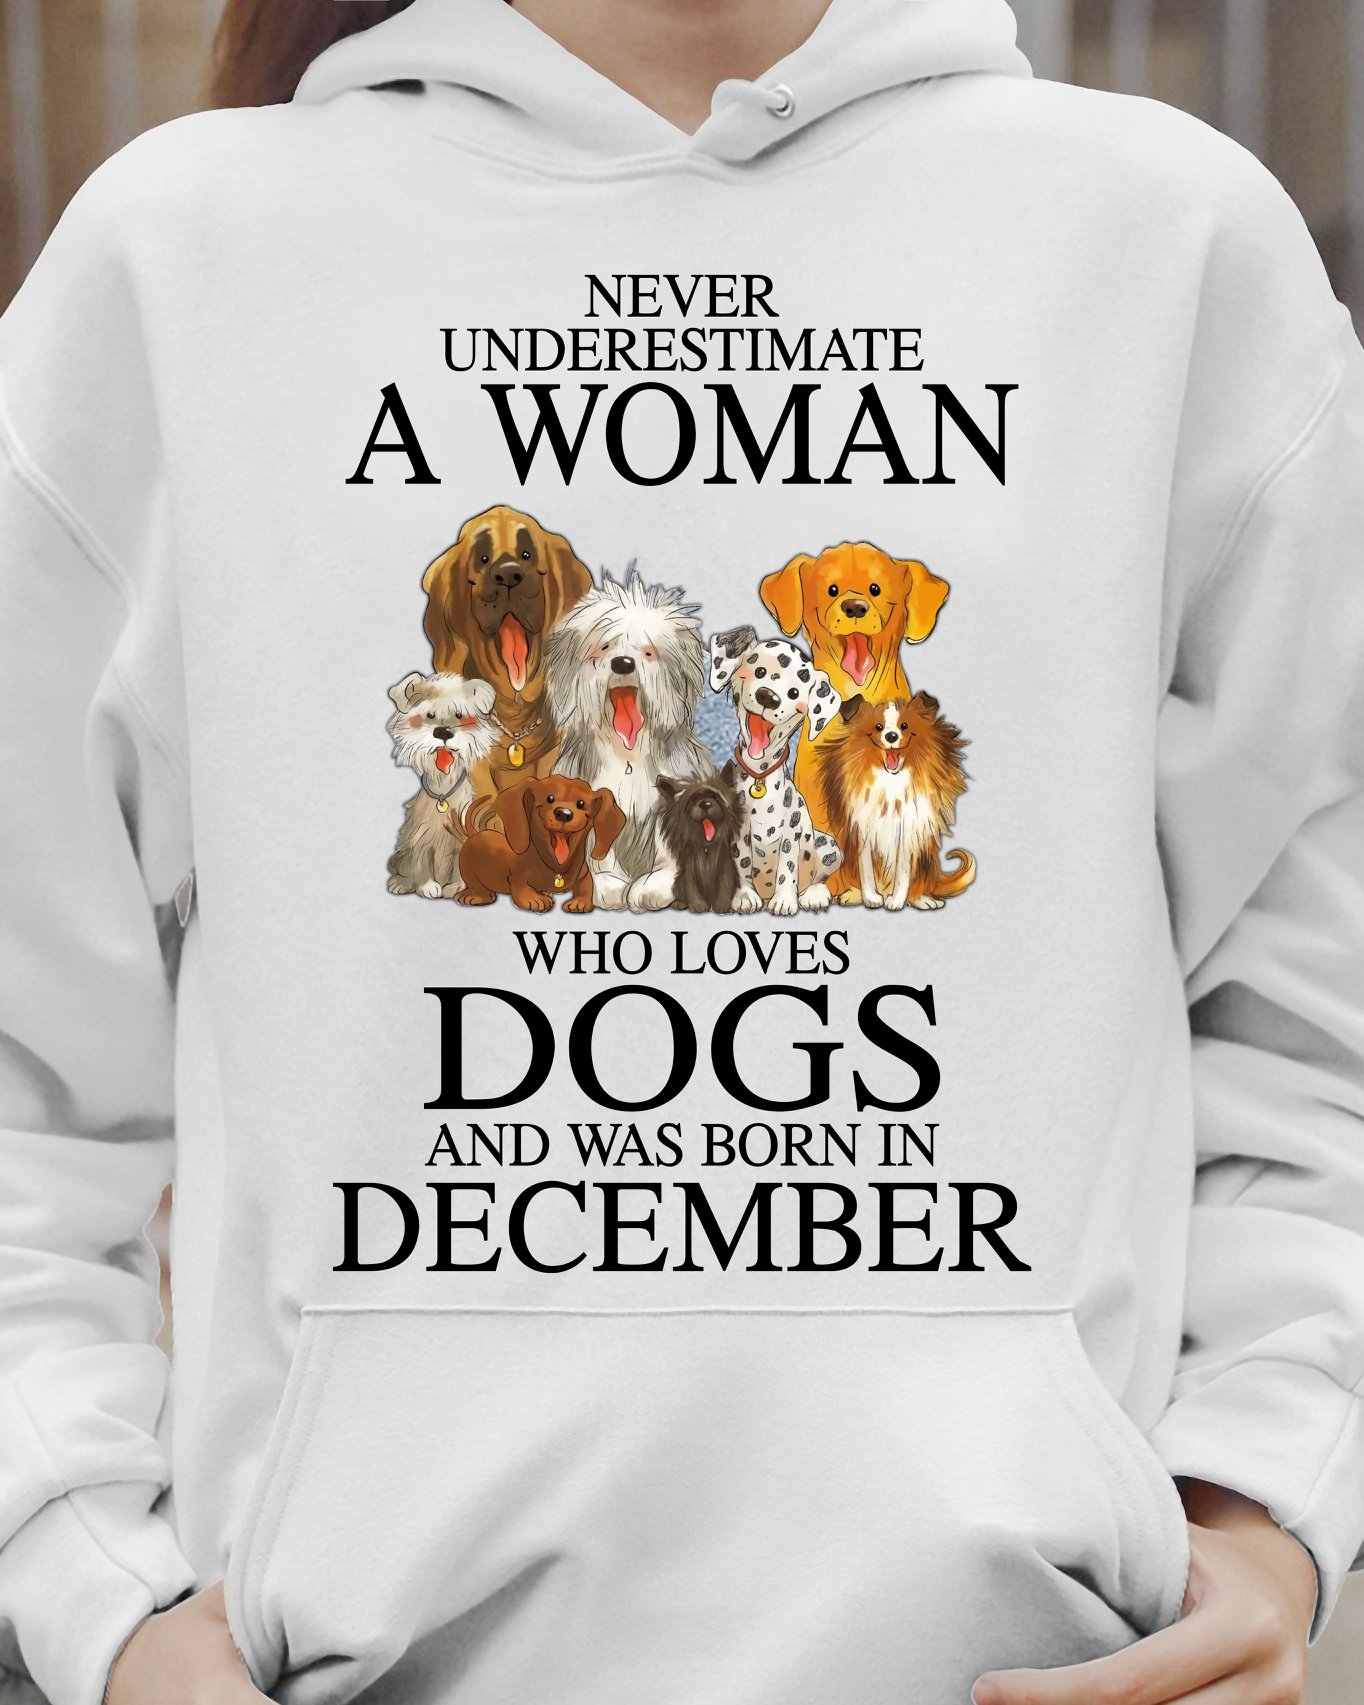 Never underestimate a woman who loves dogs and was born in December